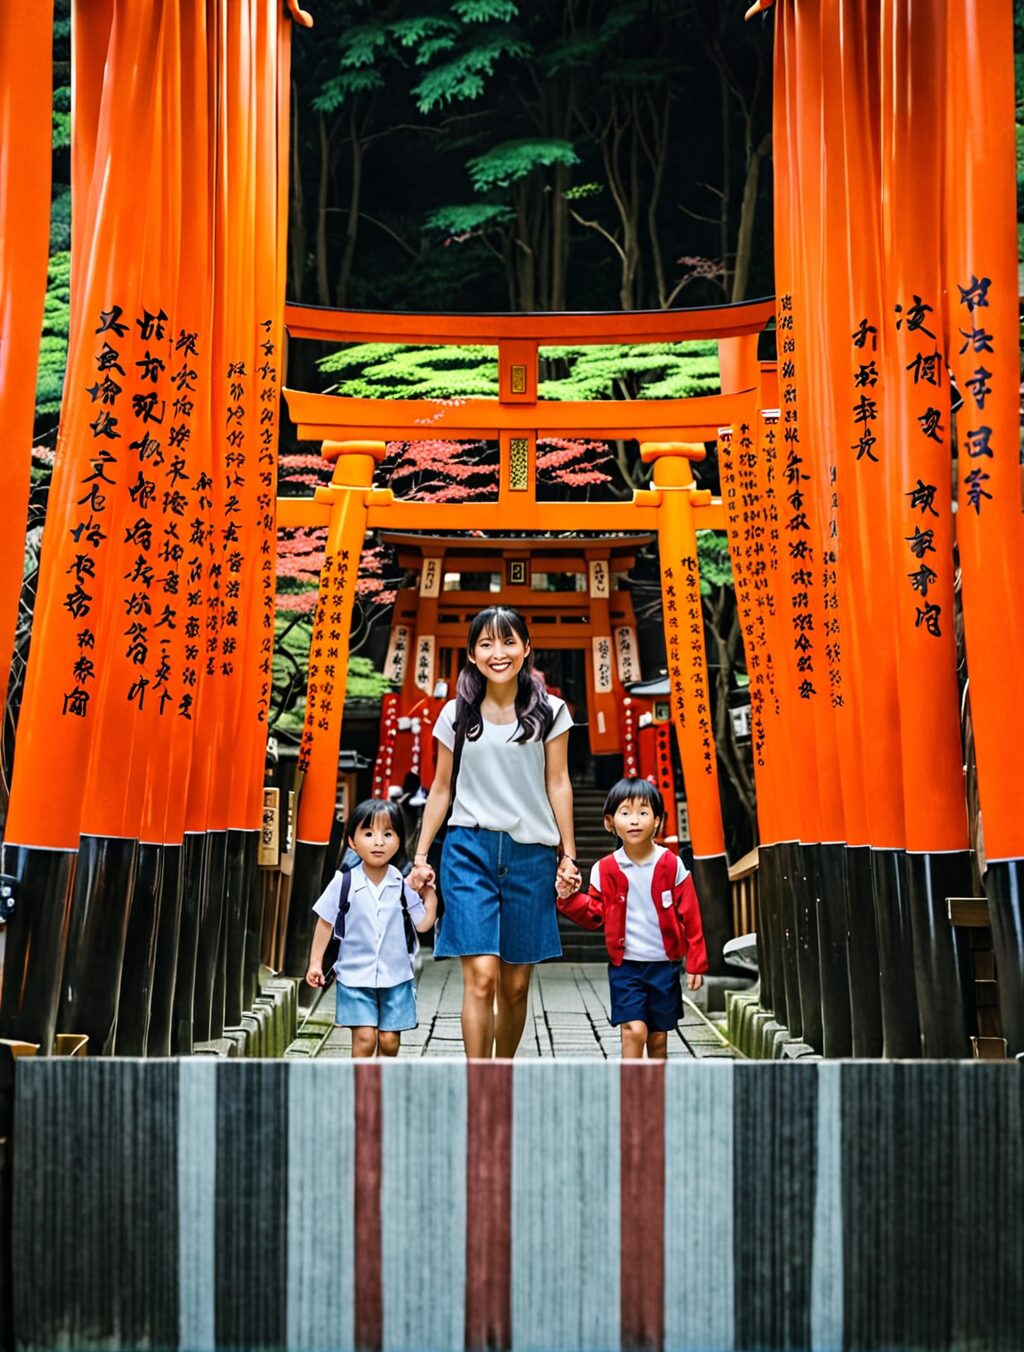 family of 5 trip to japan cost